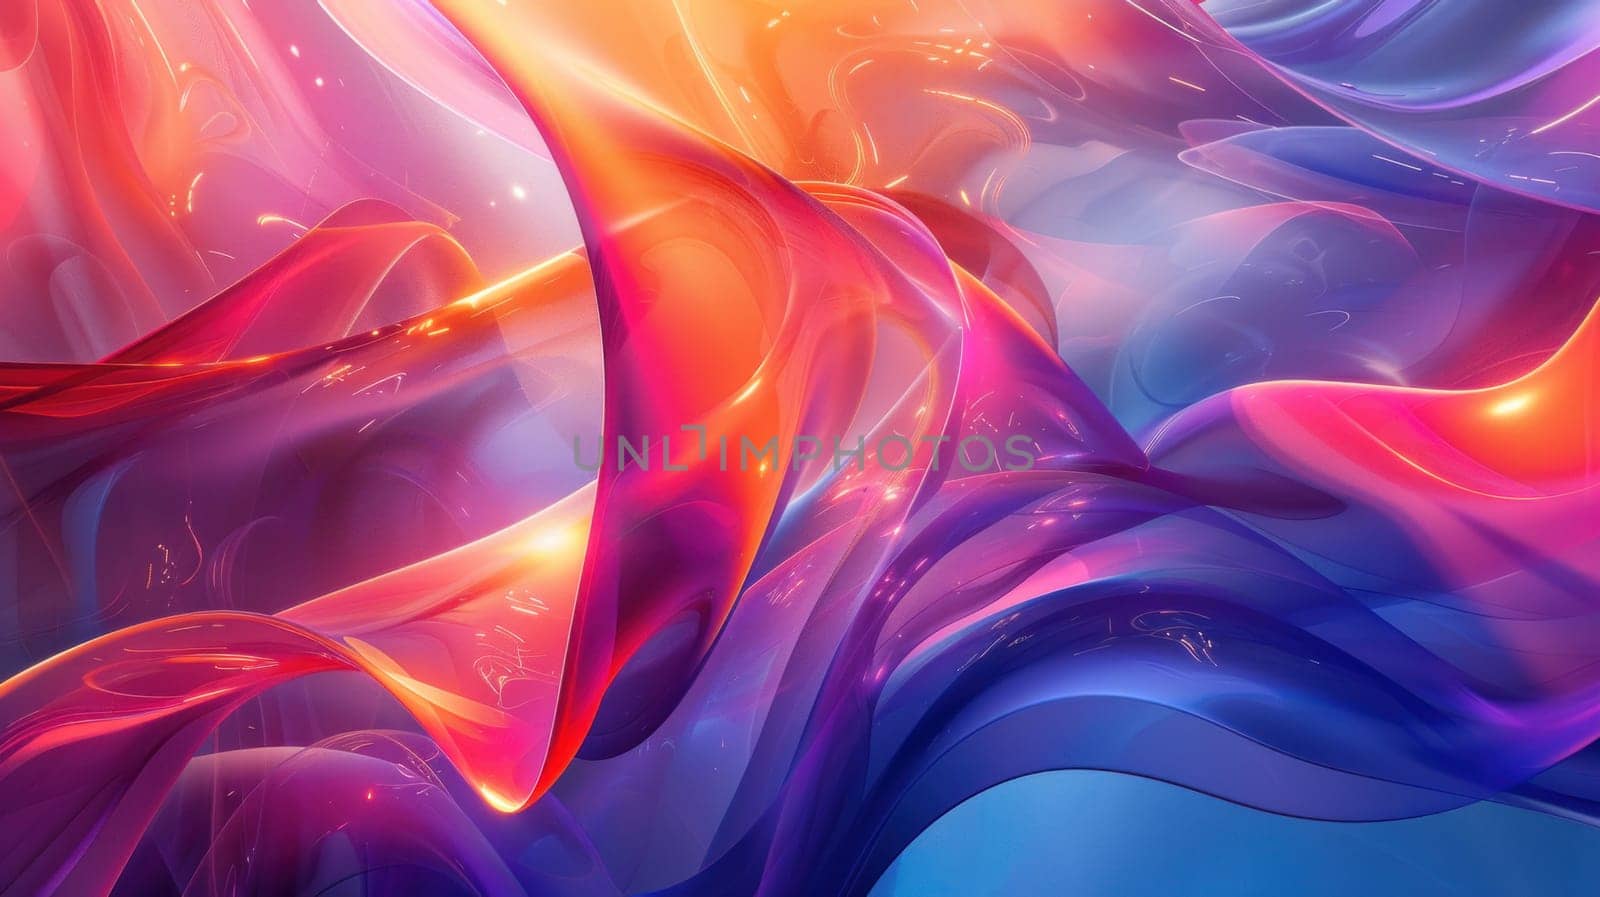 A colorful, abstract background with a blue stripe.